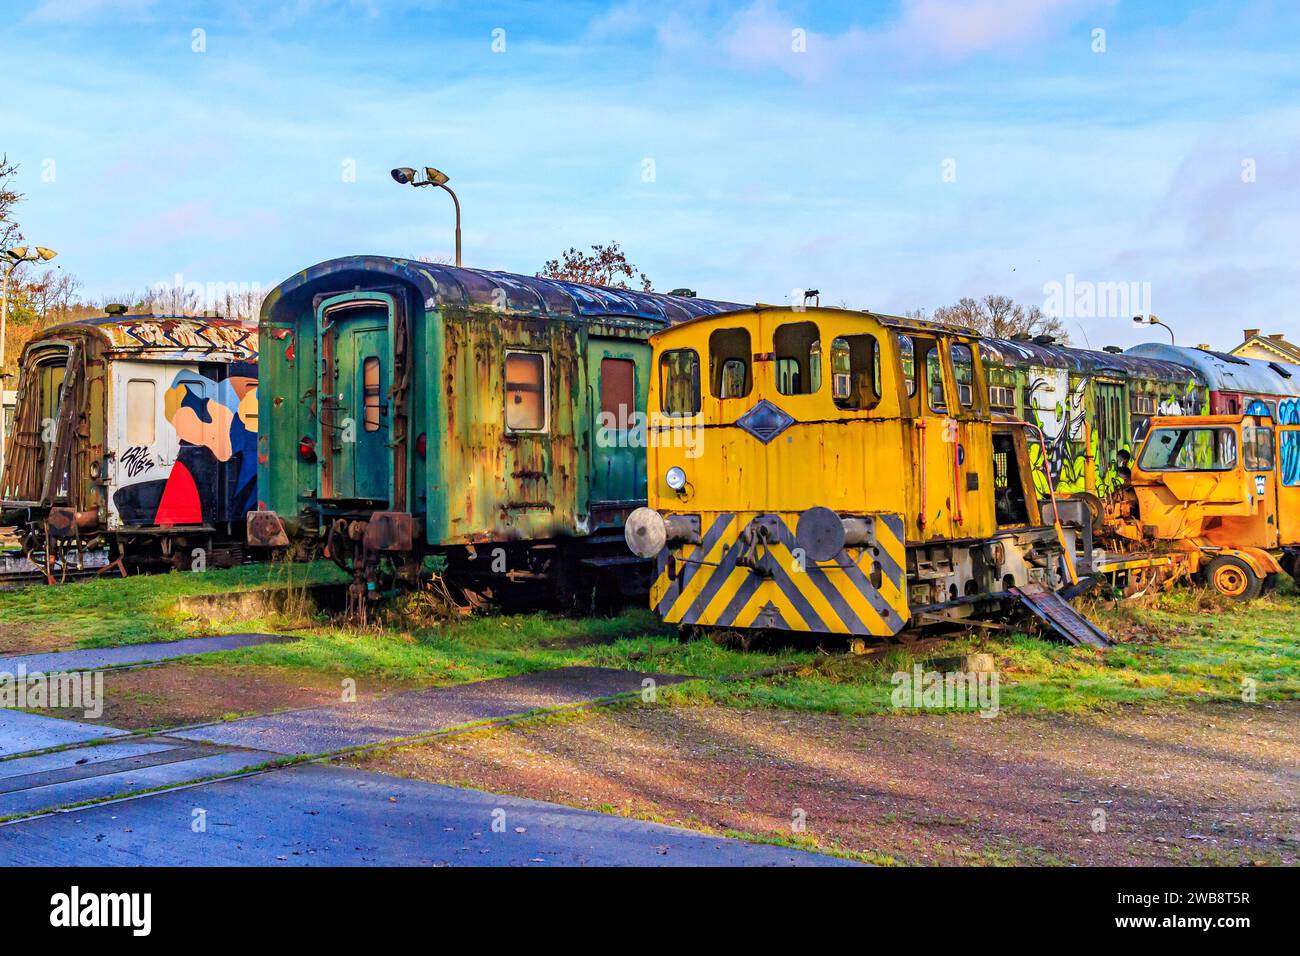 As, Limburg Belgium. December 17, 2023. Abandoned train carriages, in ruins, with graffiti and rusted by passage of time on disused tracks against blu Stock Photo